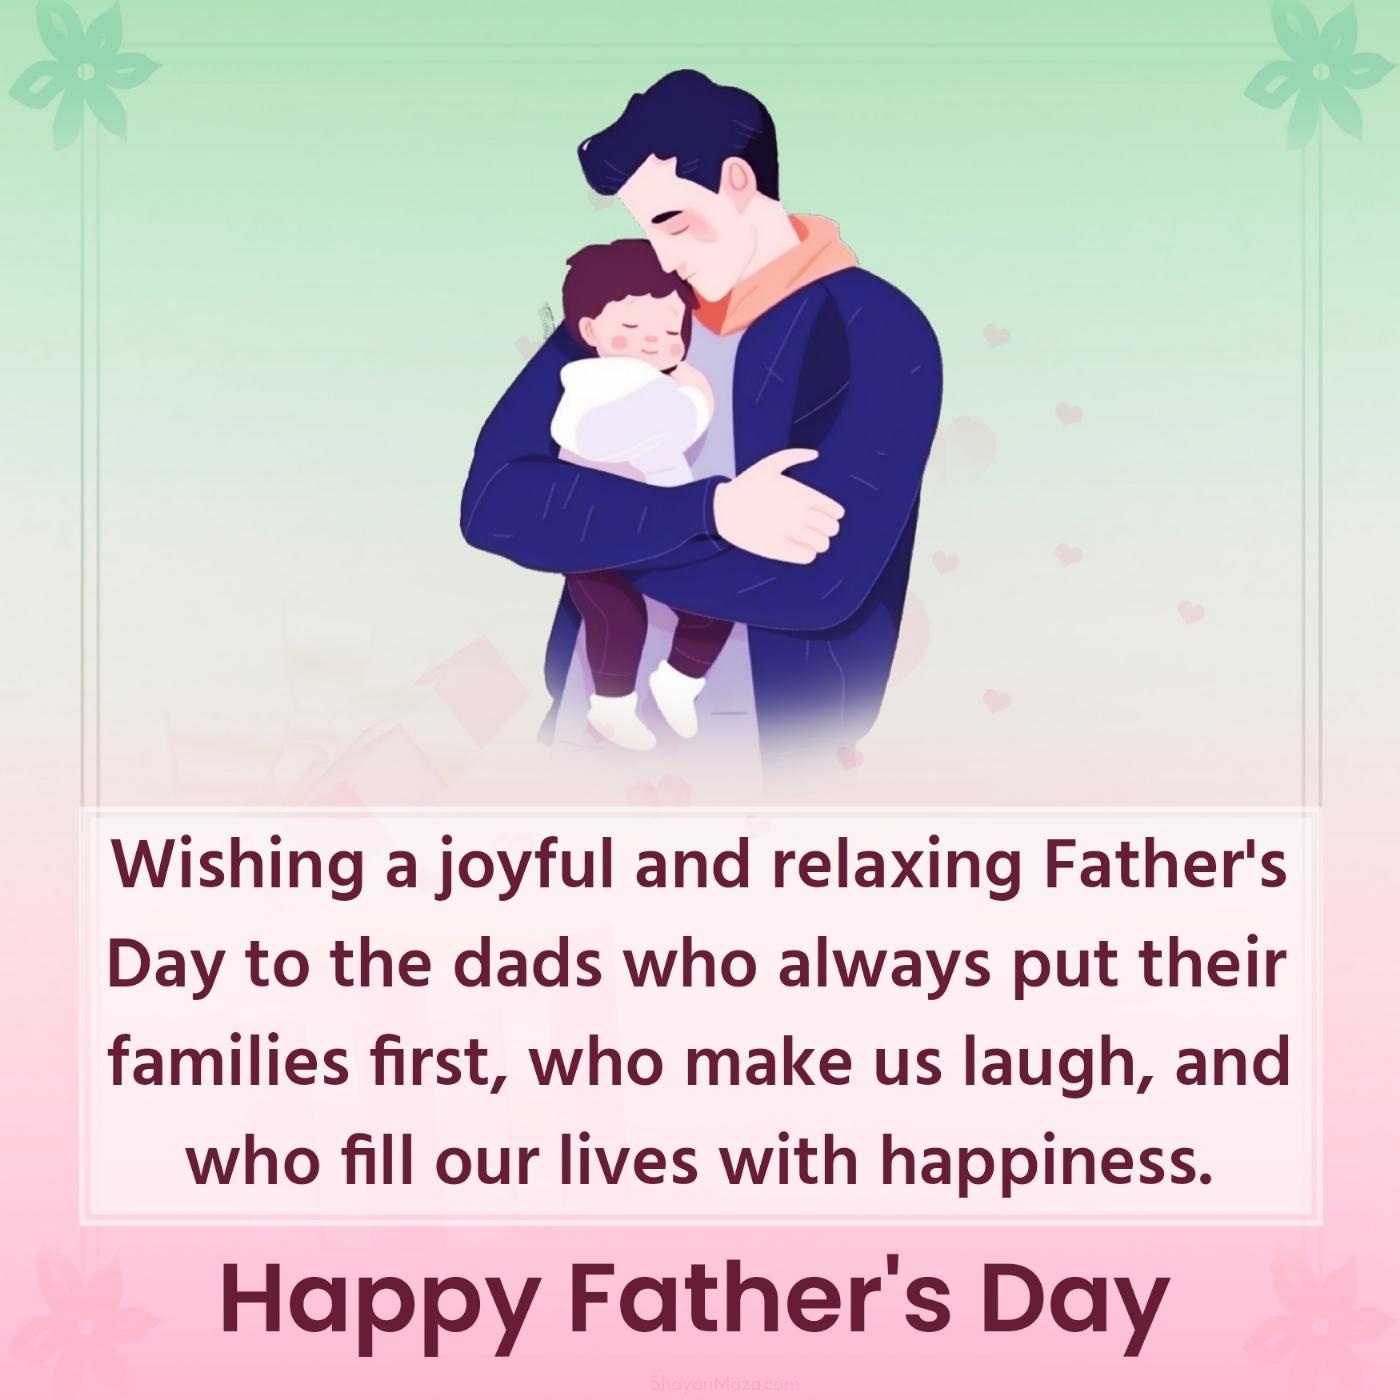 Wishing a joyful and relaxing Father's Day to the dads